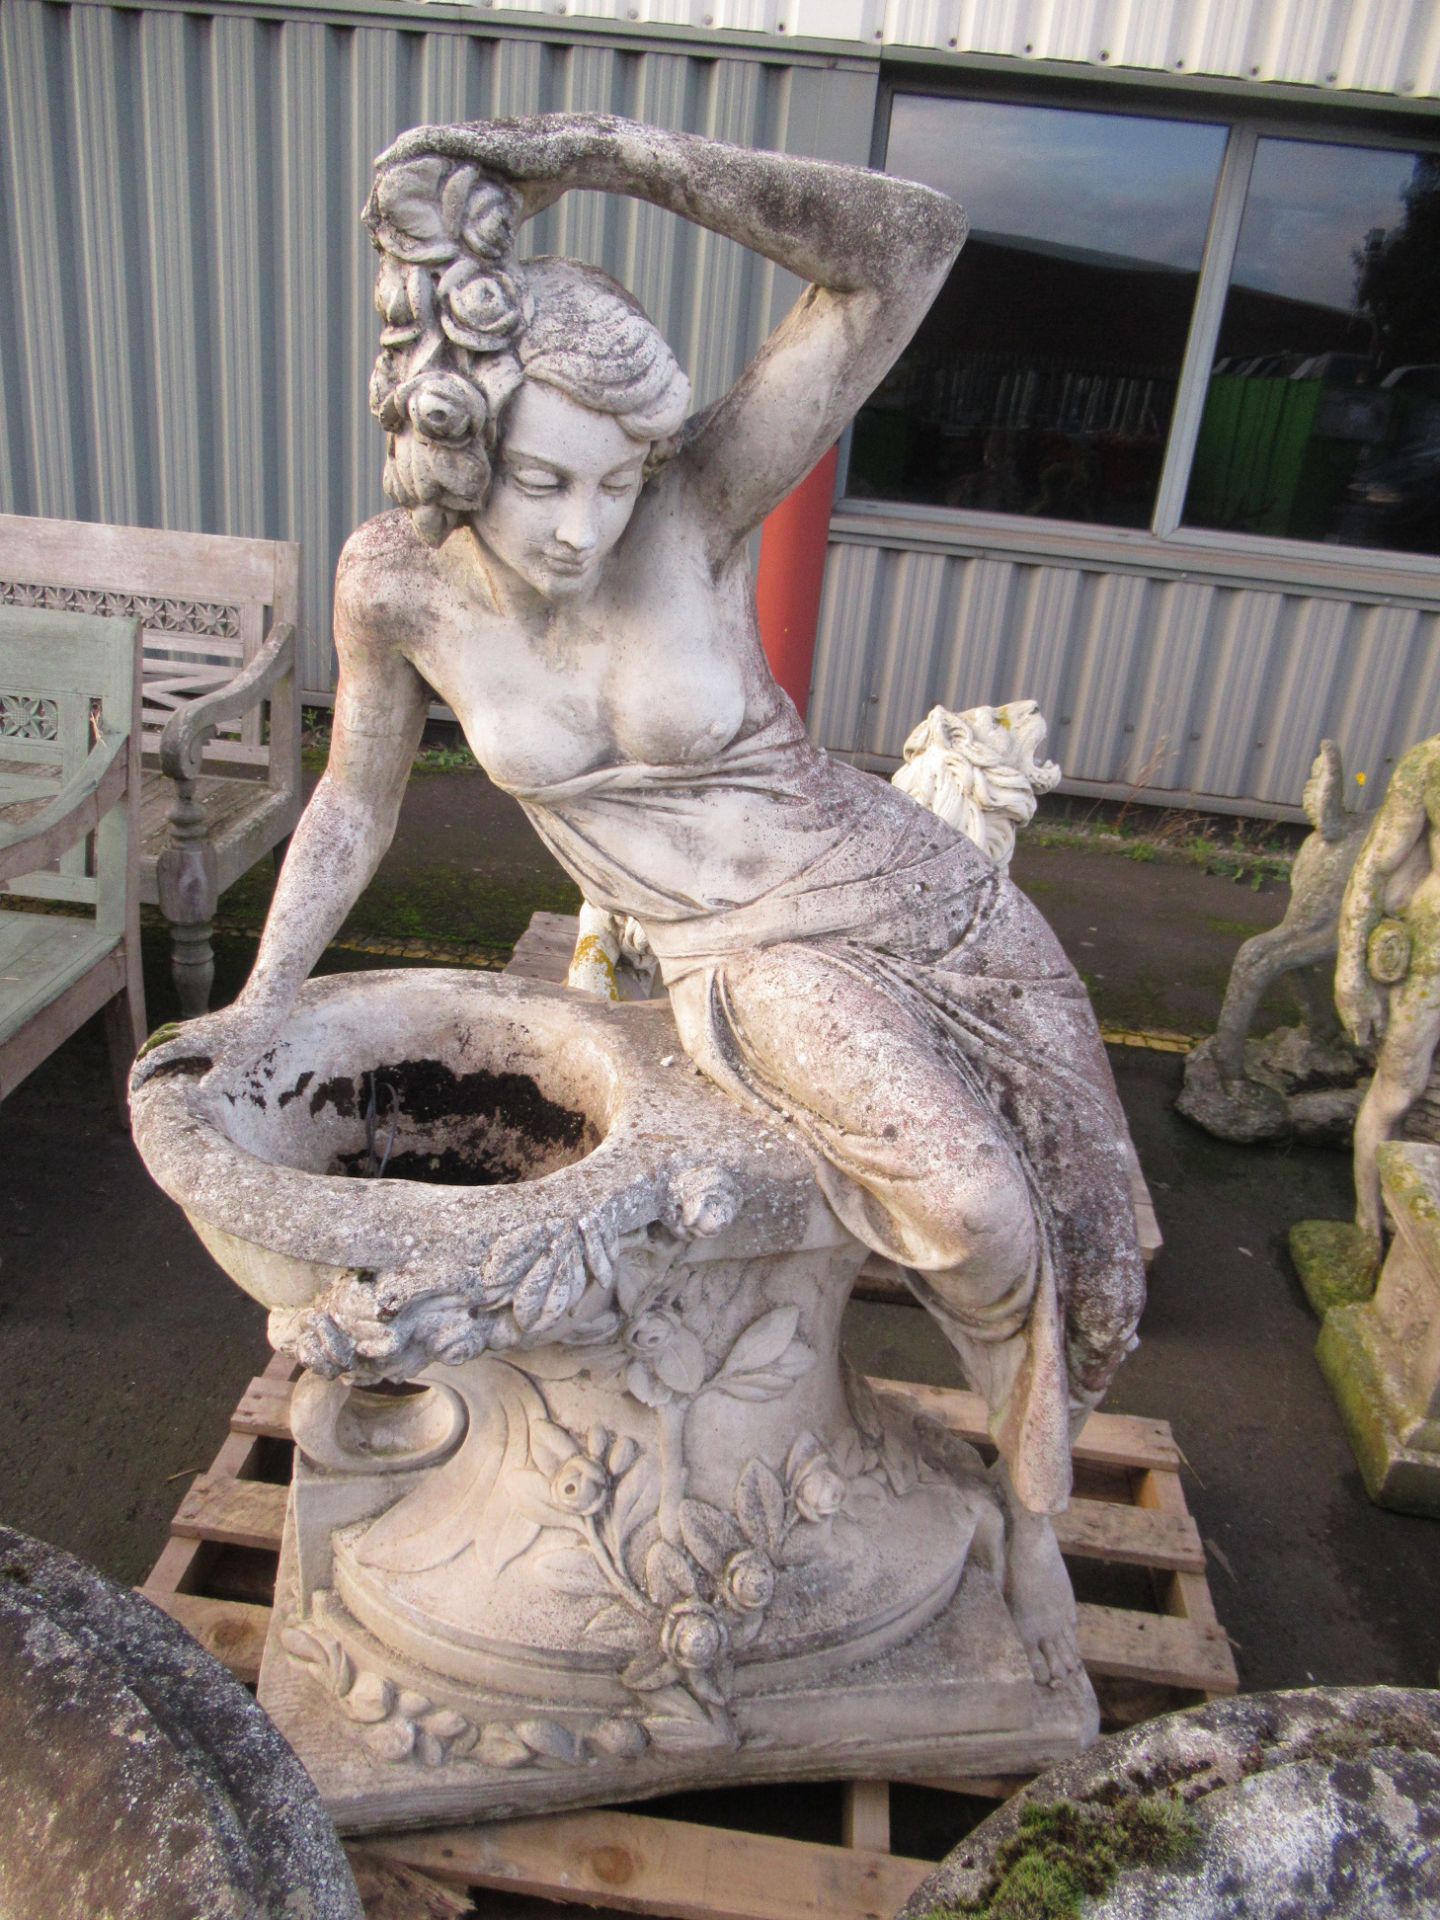 A Large Water Feature/Birdbath Statue of a Semi Naked Lady